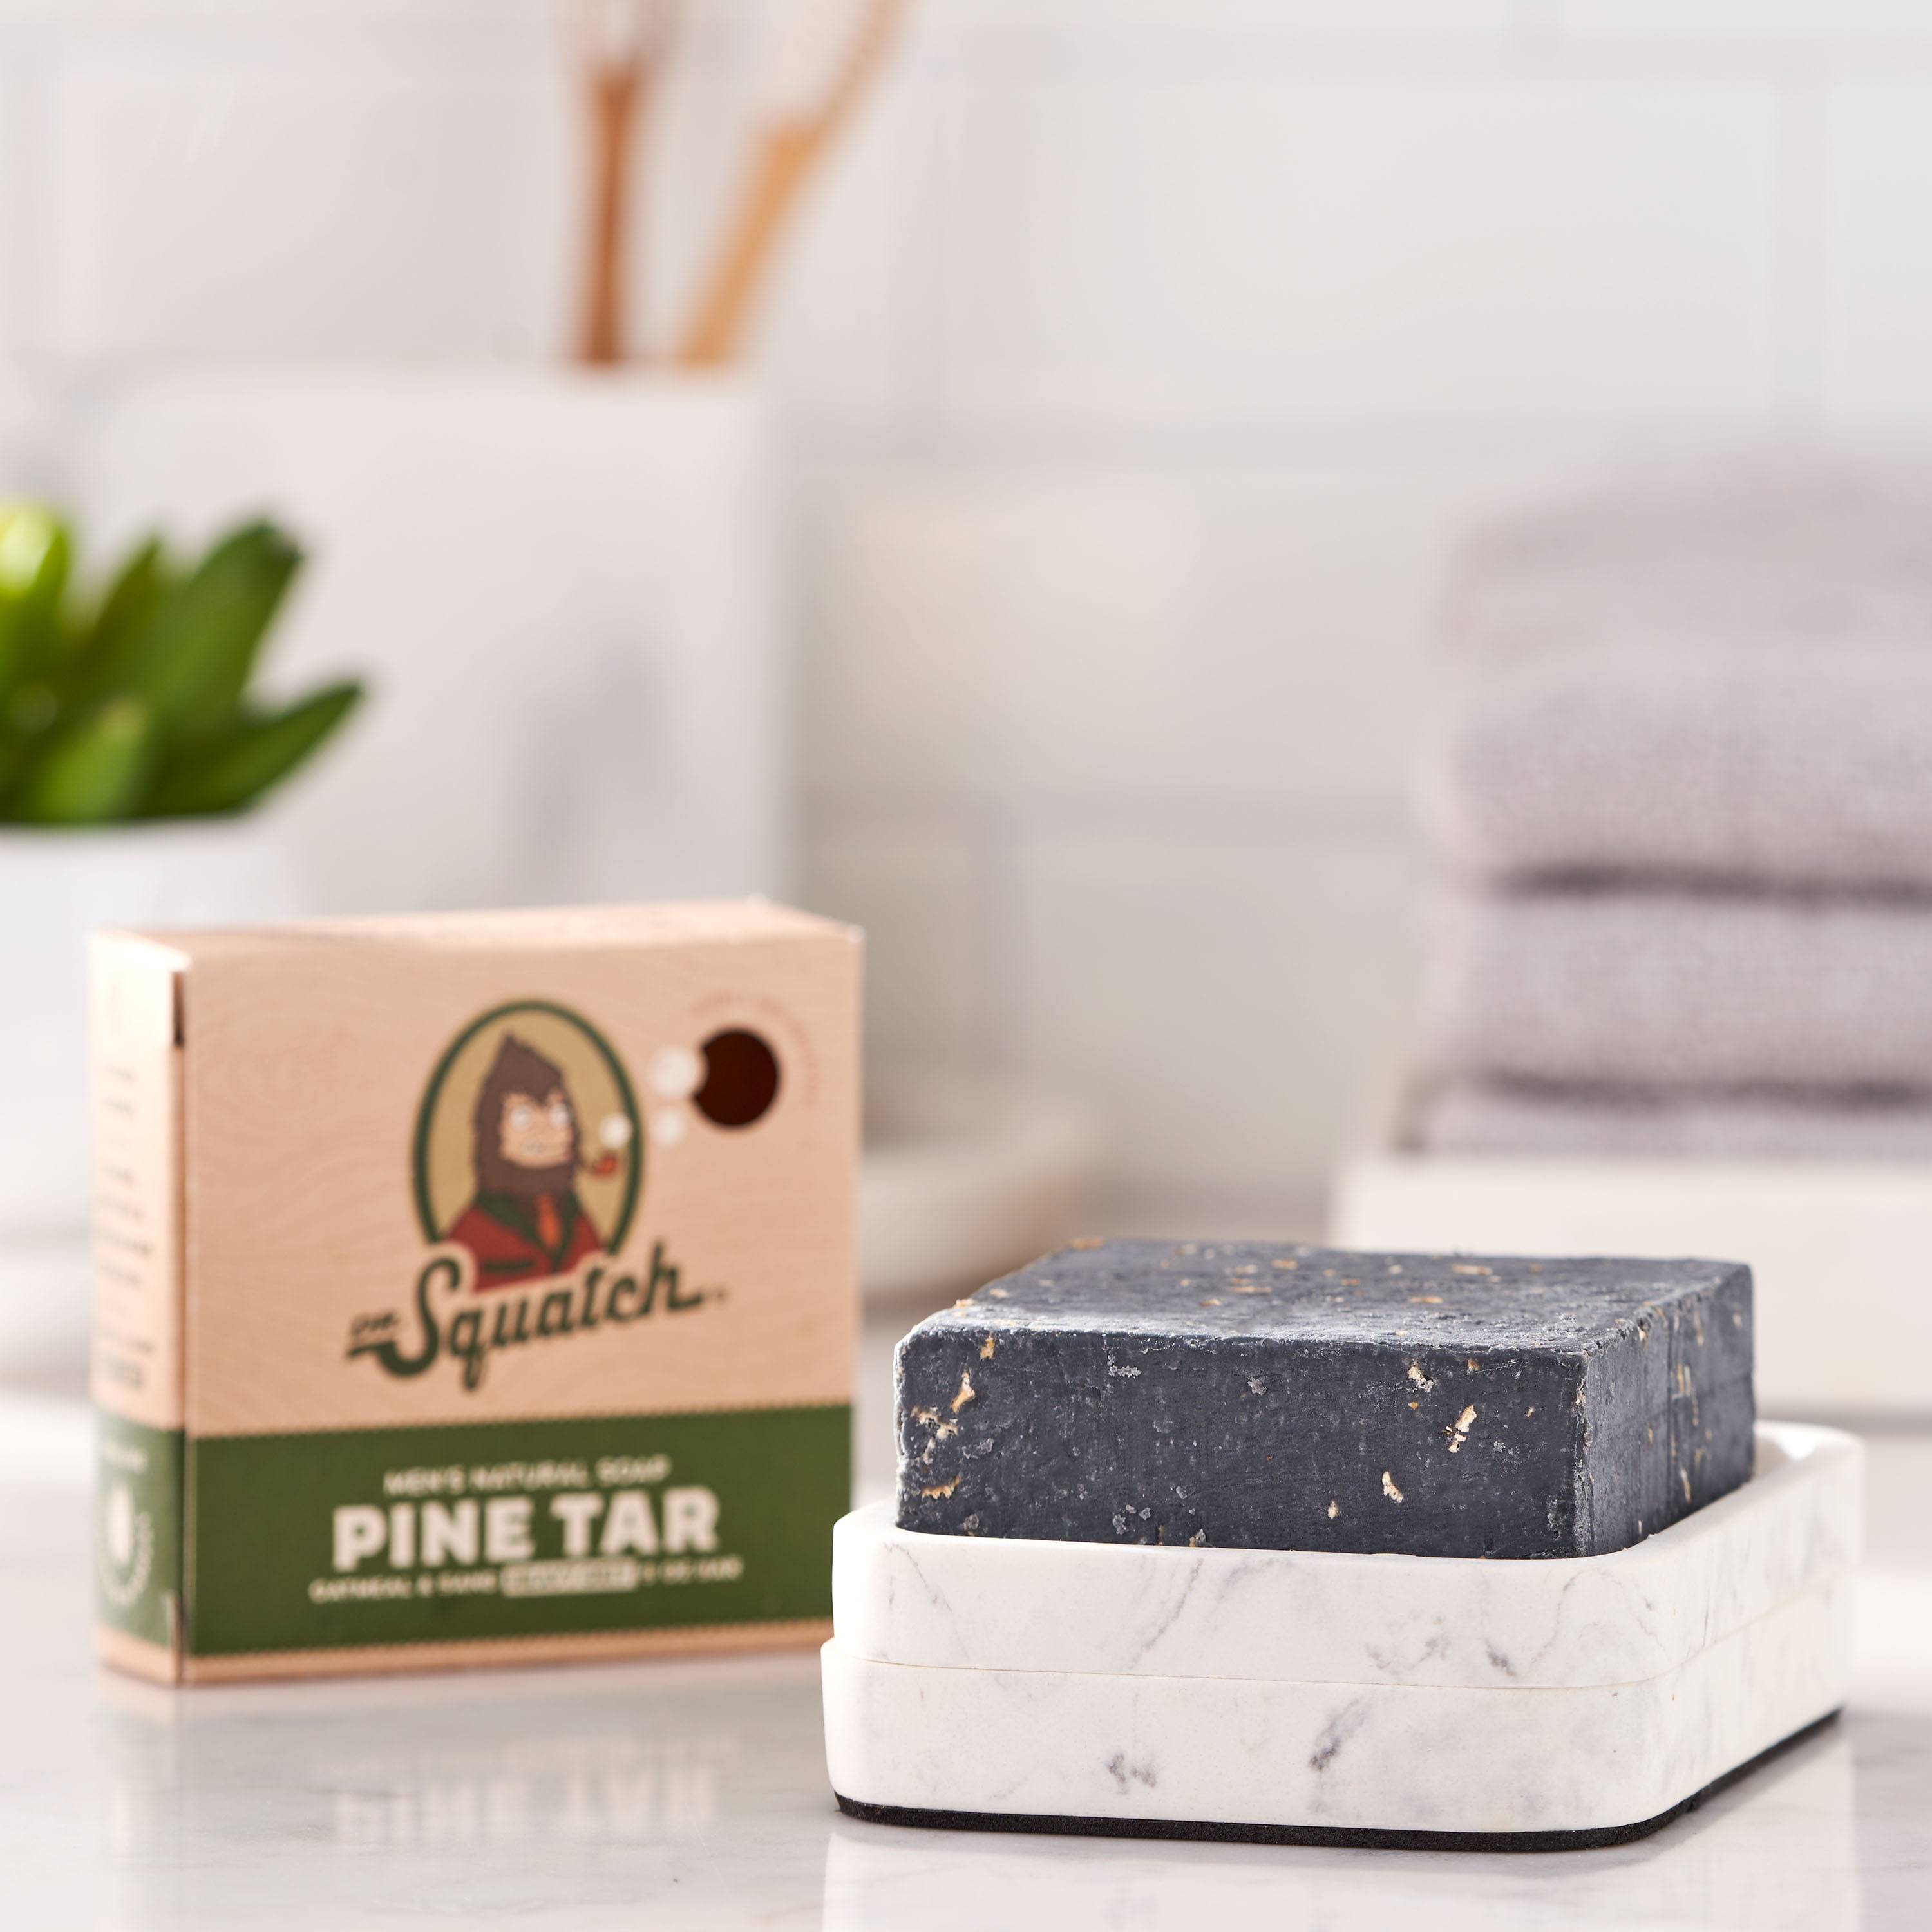  Dr. Squatch Pine Tar Soap 2-Pack Bundle - Mens Bar with Natural  Woodsy Scent and Skin Exfoliating Scrub – Handmade with Pine, Coconut,  Olive Organic Oils in USA (2 Bar Set) 